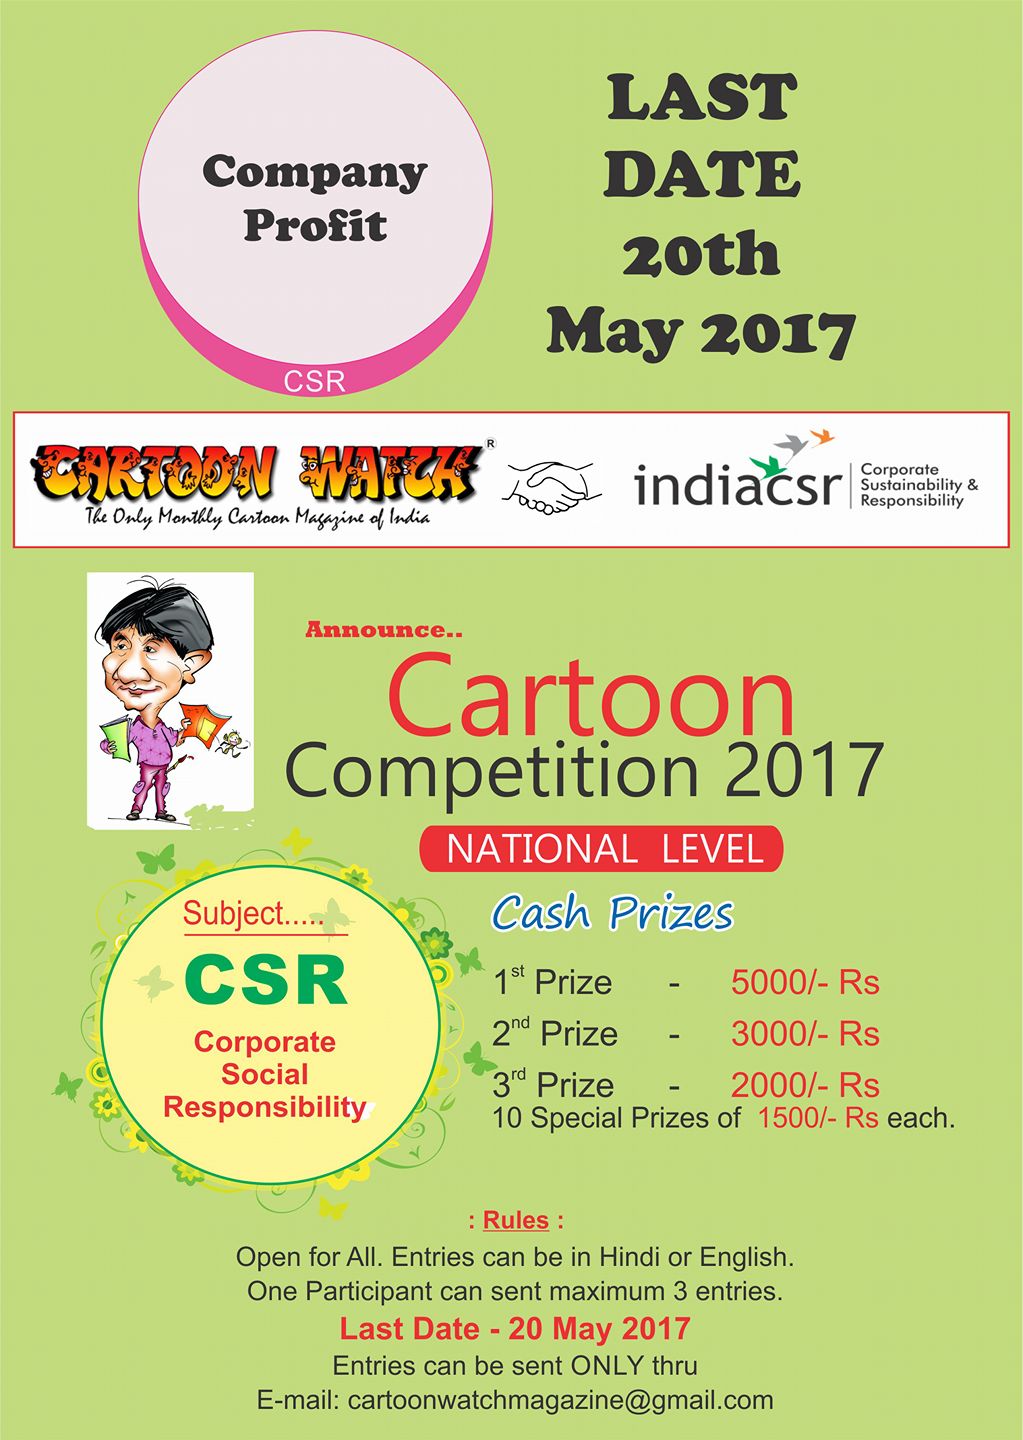 MEDIA MANTRA by MRINAL CHATTERJEE: Cartoon Competition